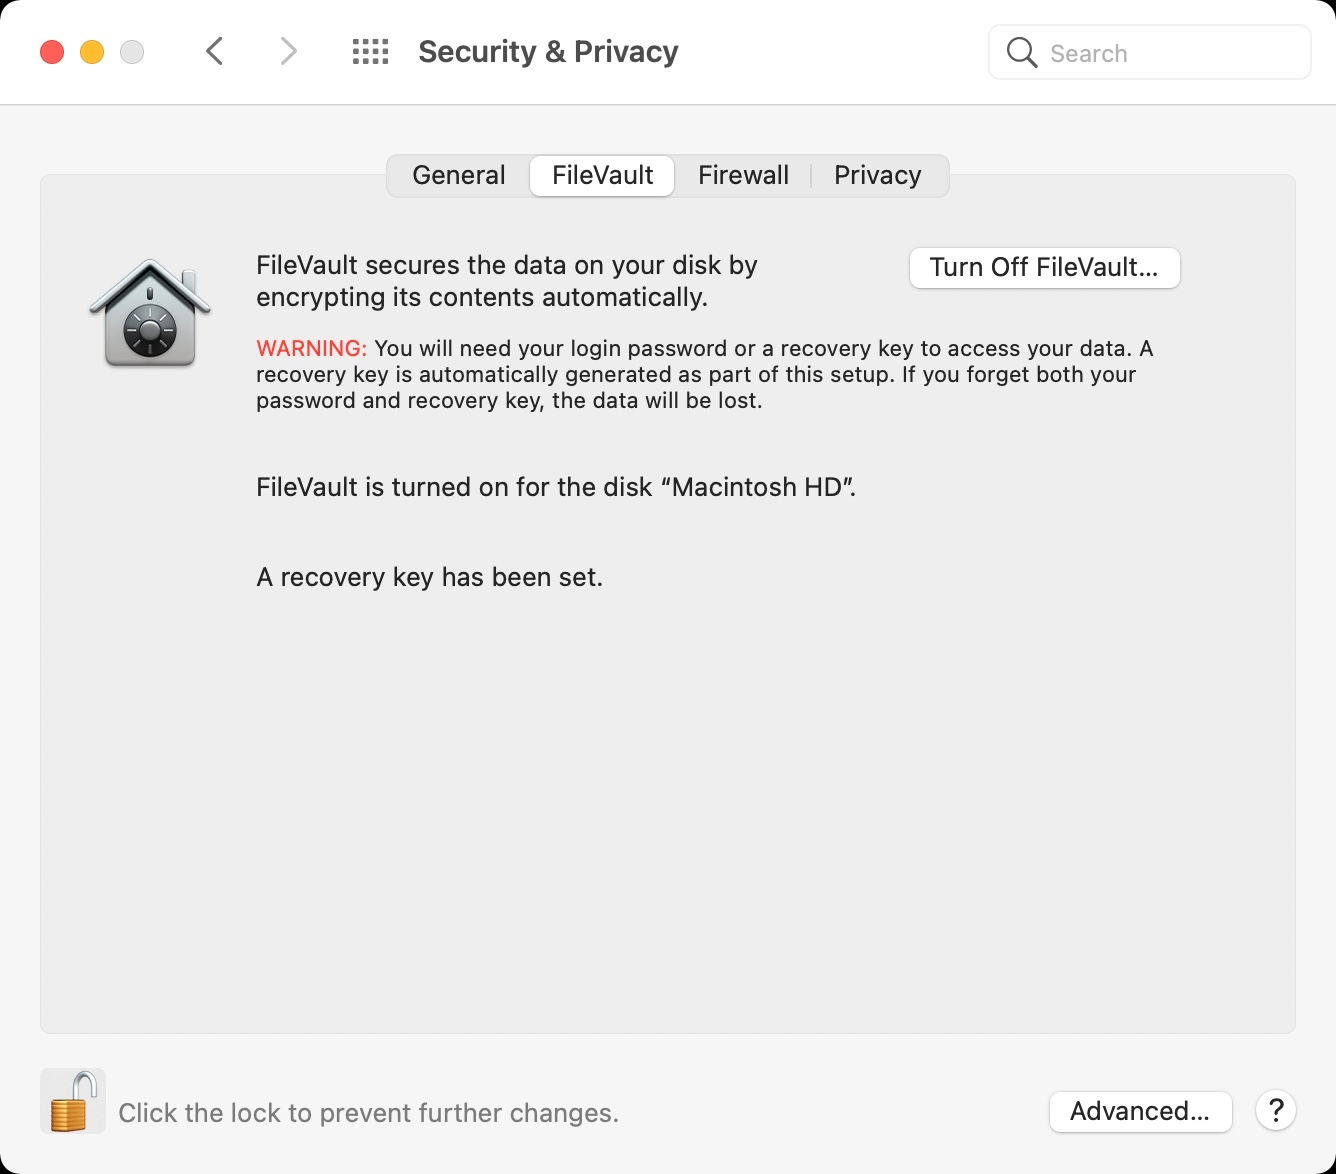 does file vault recovery key help with password for a mac?